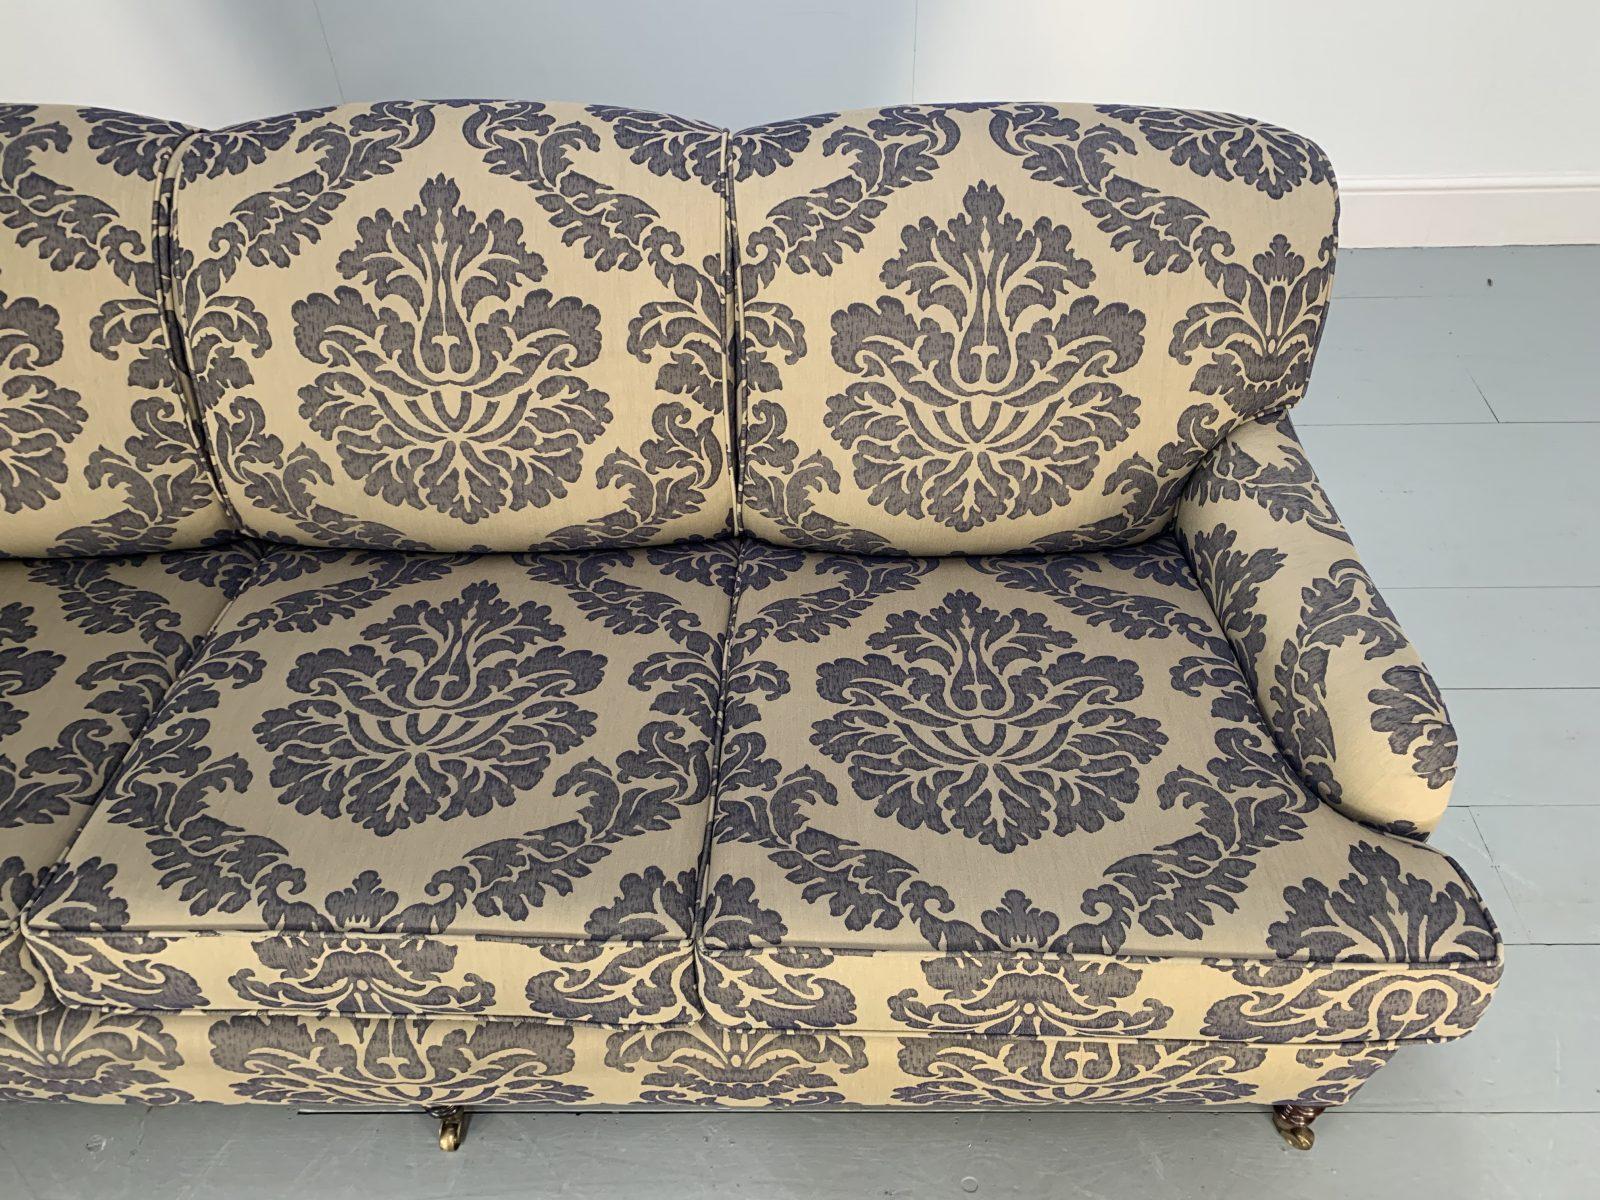 George Smith Signature “Standard-Arm” Large 3-Seat Sofa in Bernini Damask In Good Condition For Sale In Barrowford, GB